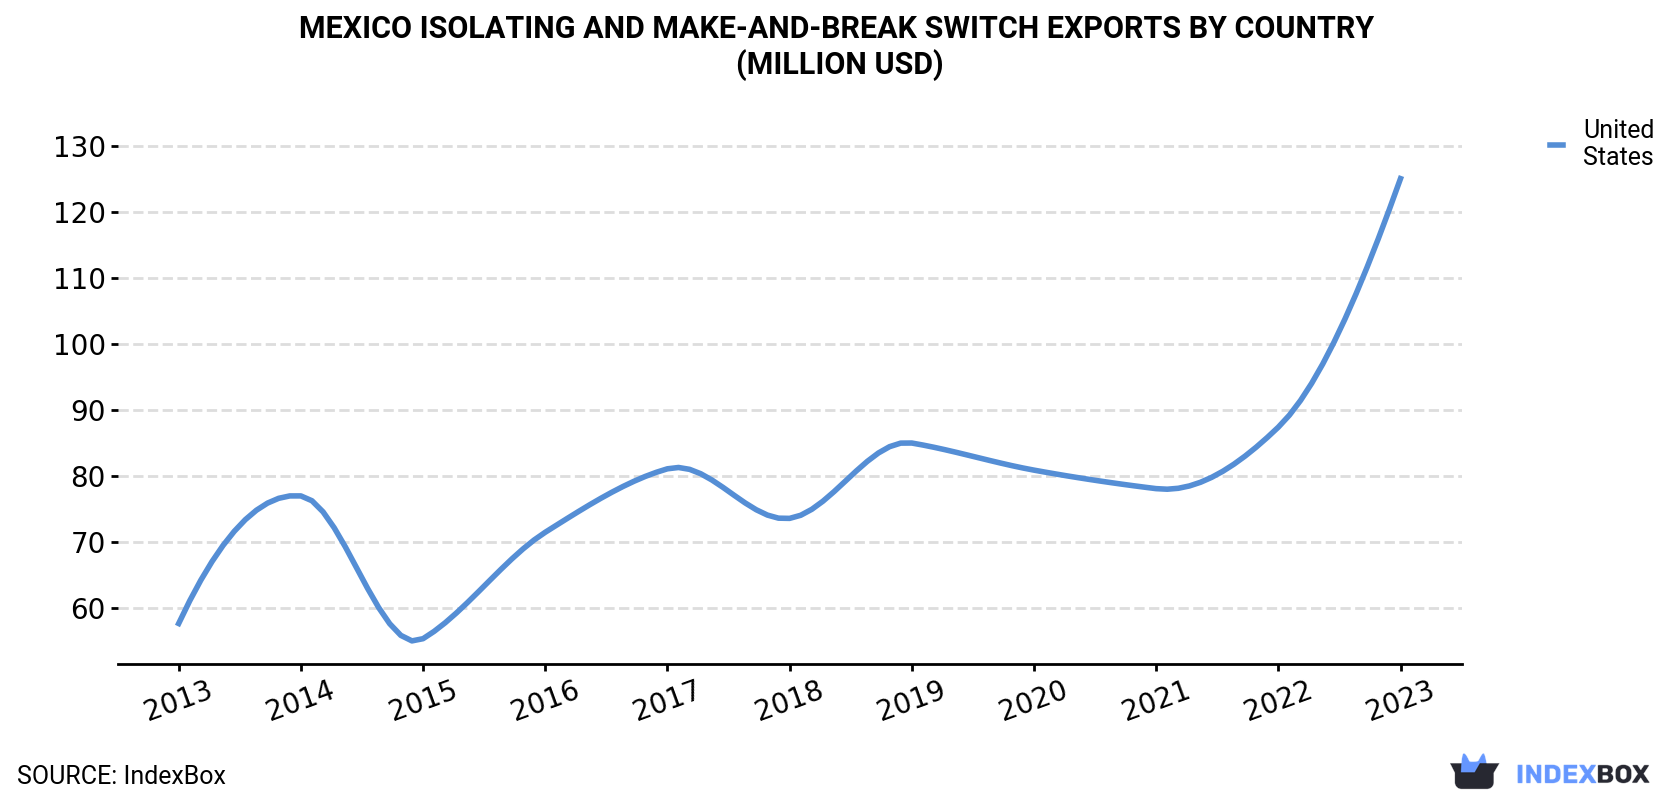 Mexico Isolating and Make-and-Break Switch Exports By Country (Million USD)